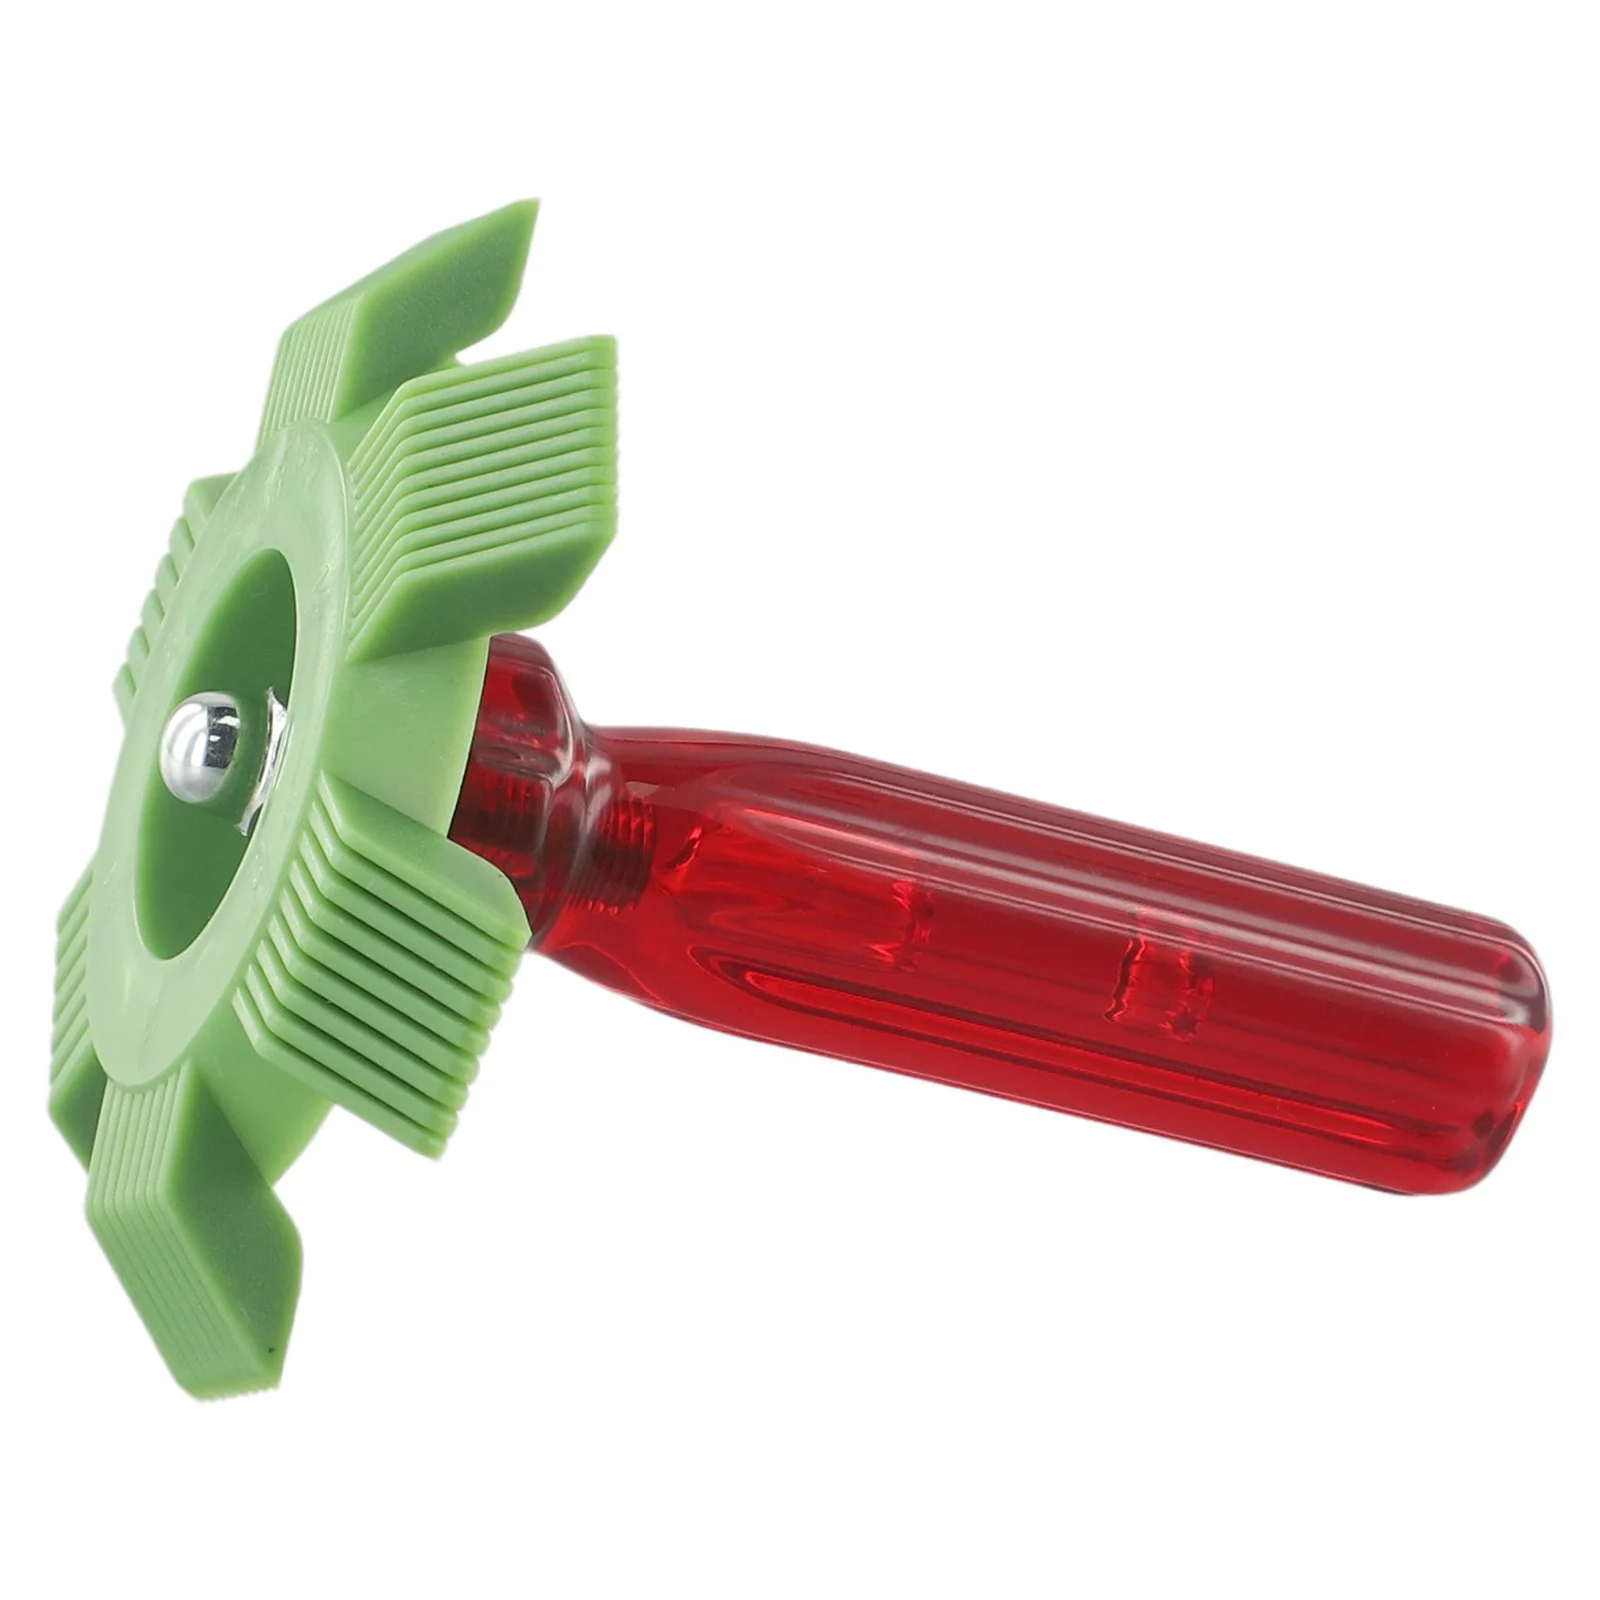 Easy to Use Fin Comb Tool for Optimum Performance and Airflow of Air Conditioner Cooler and Refrigeration System